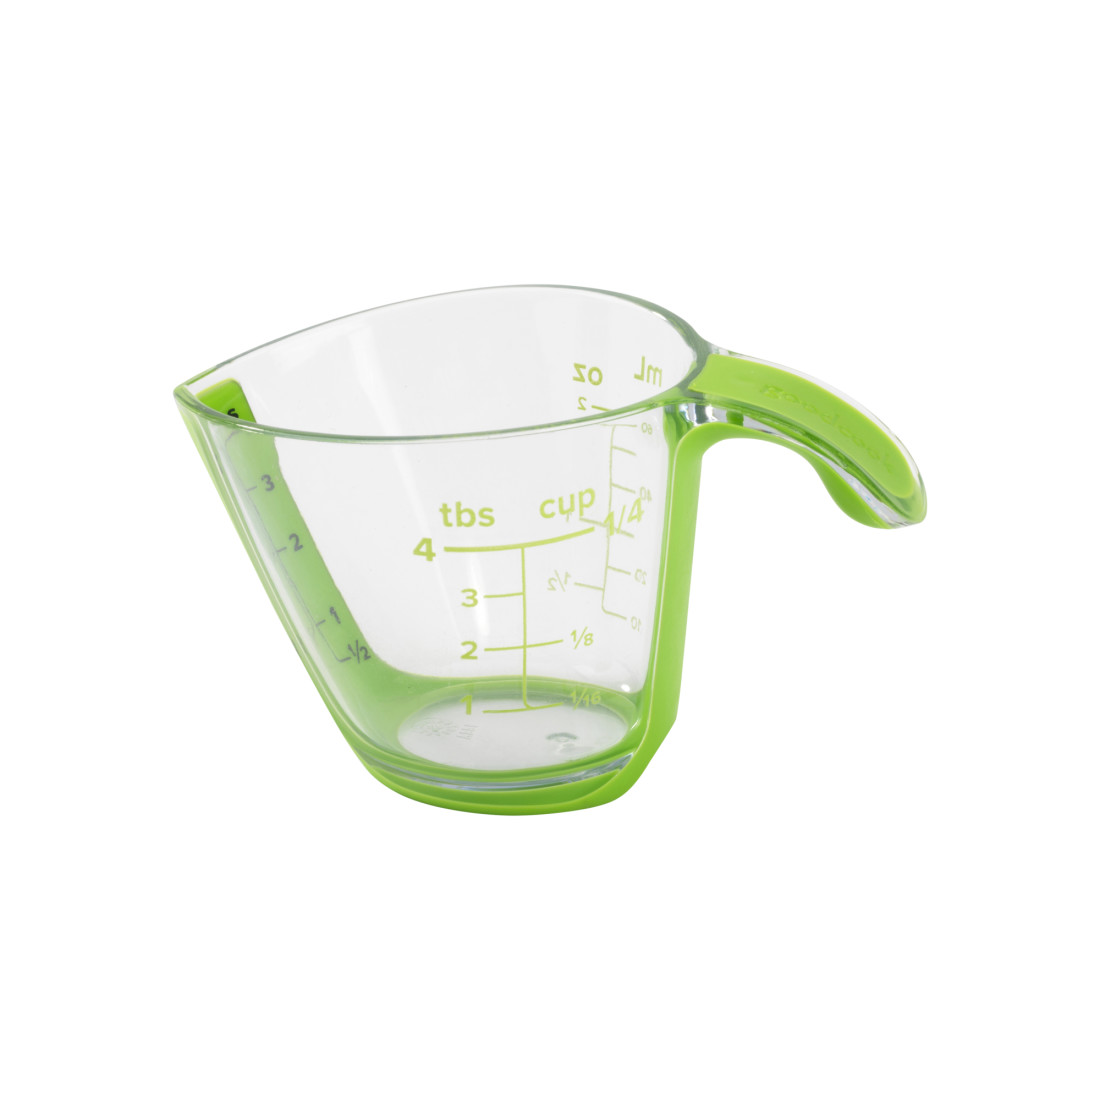 Set of 4 Glass Measuring Cups - Kitchen Mixing Bowl Liquid Measure Cup,  Glass Tupperware Bakeware. 1 cup, 2 cup, 4 cup, 8 cup.